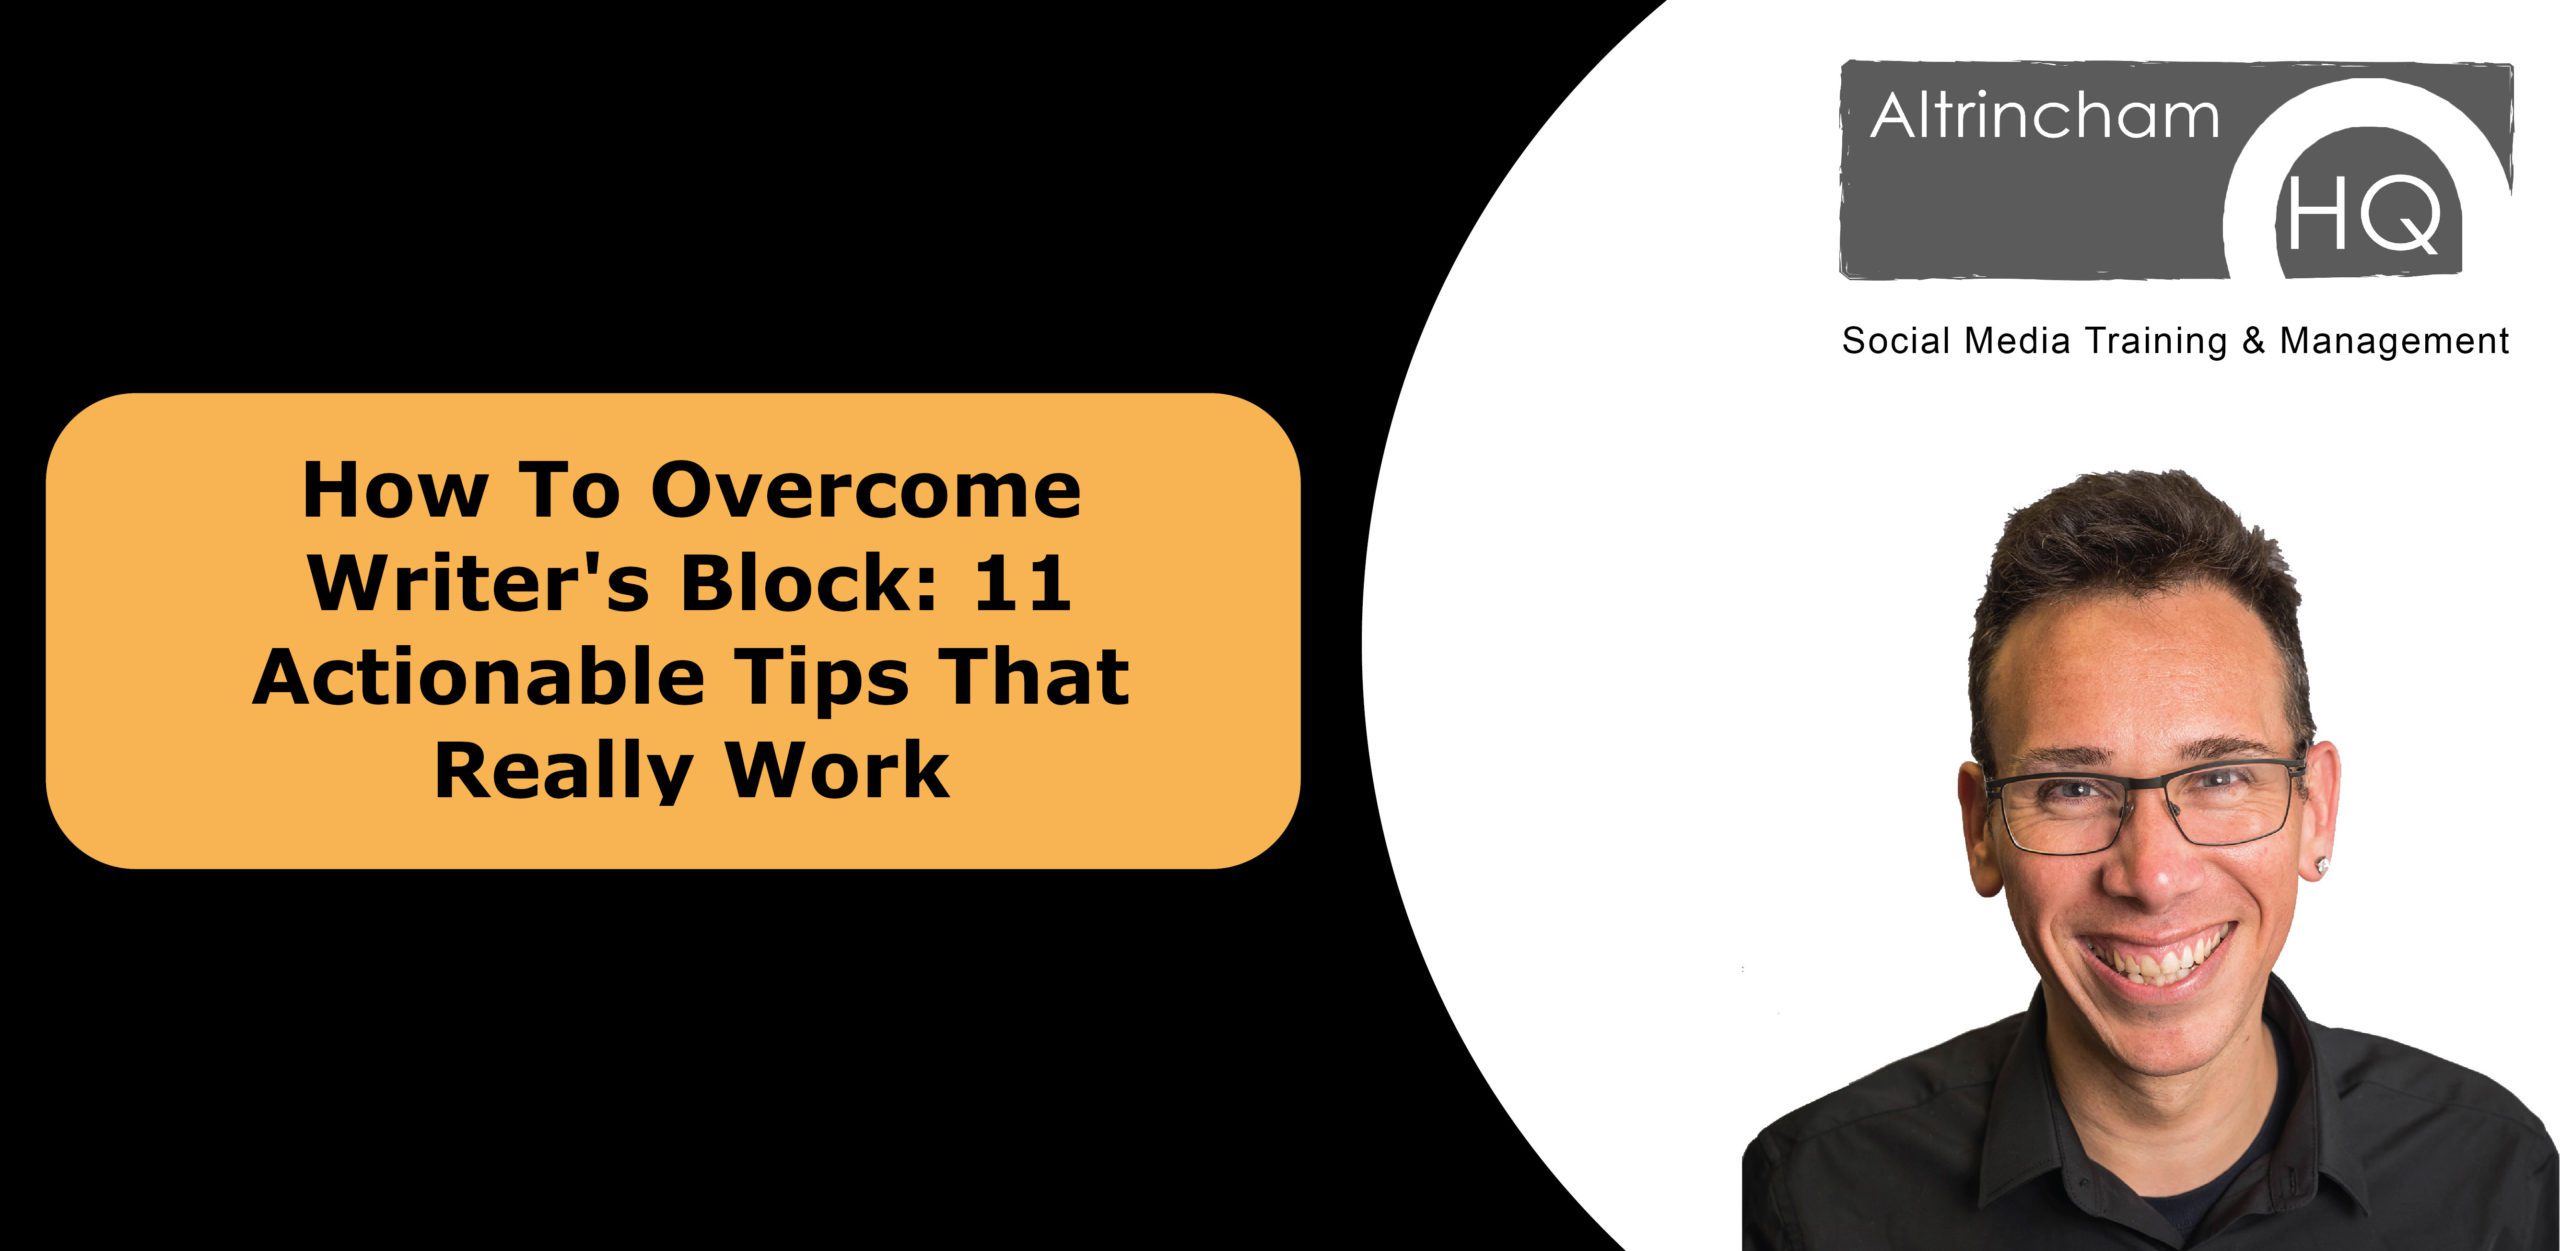 How To Overcome Writer’s Block: 11 Actionable Tips That Really Work